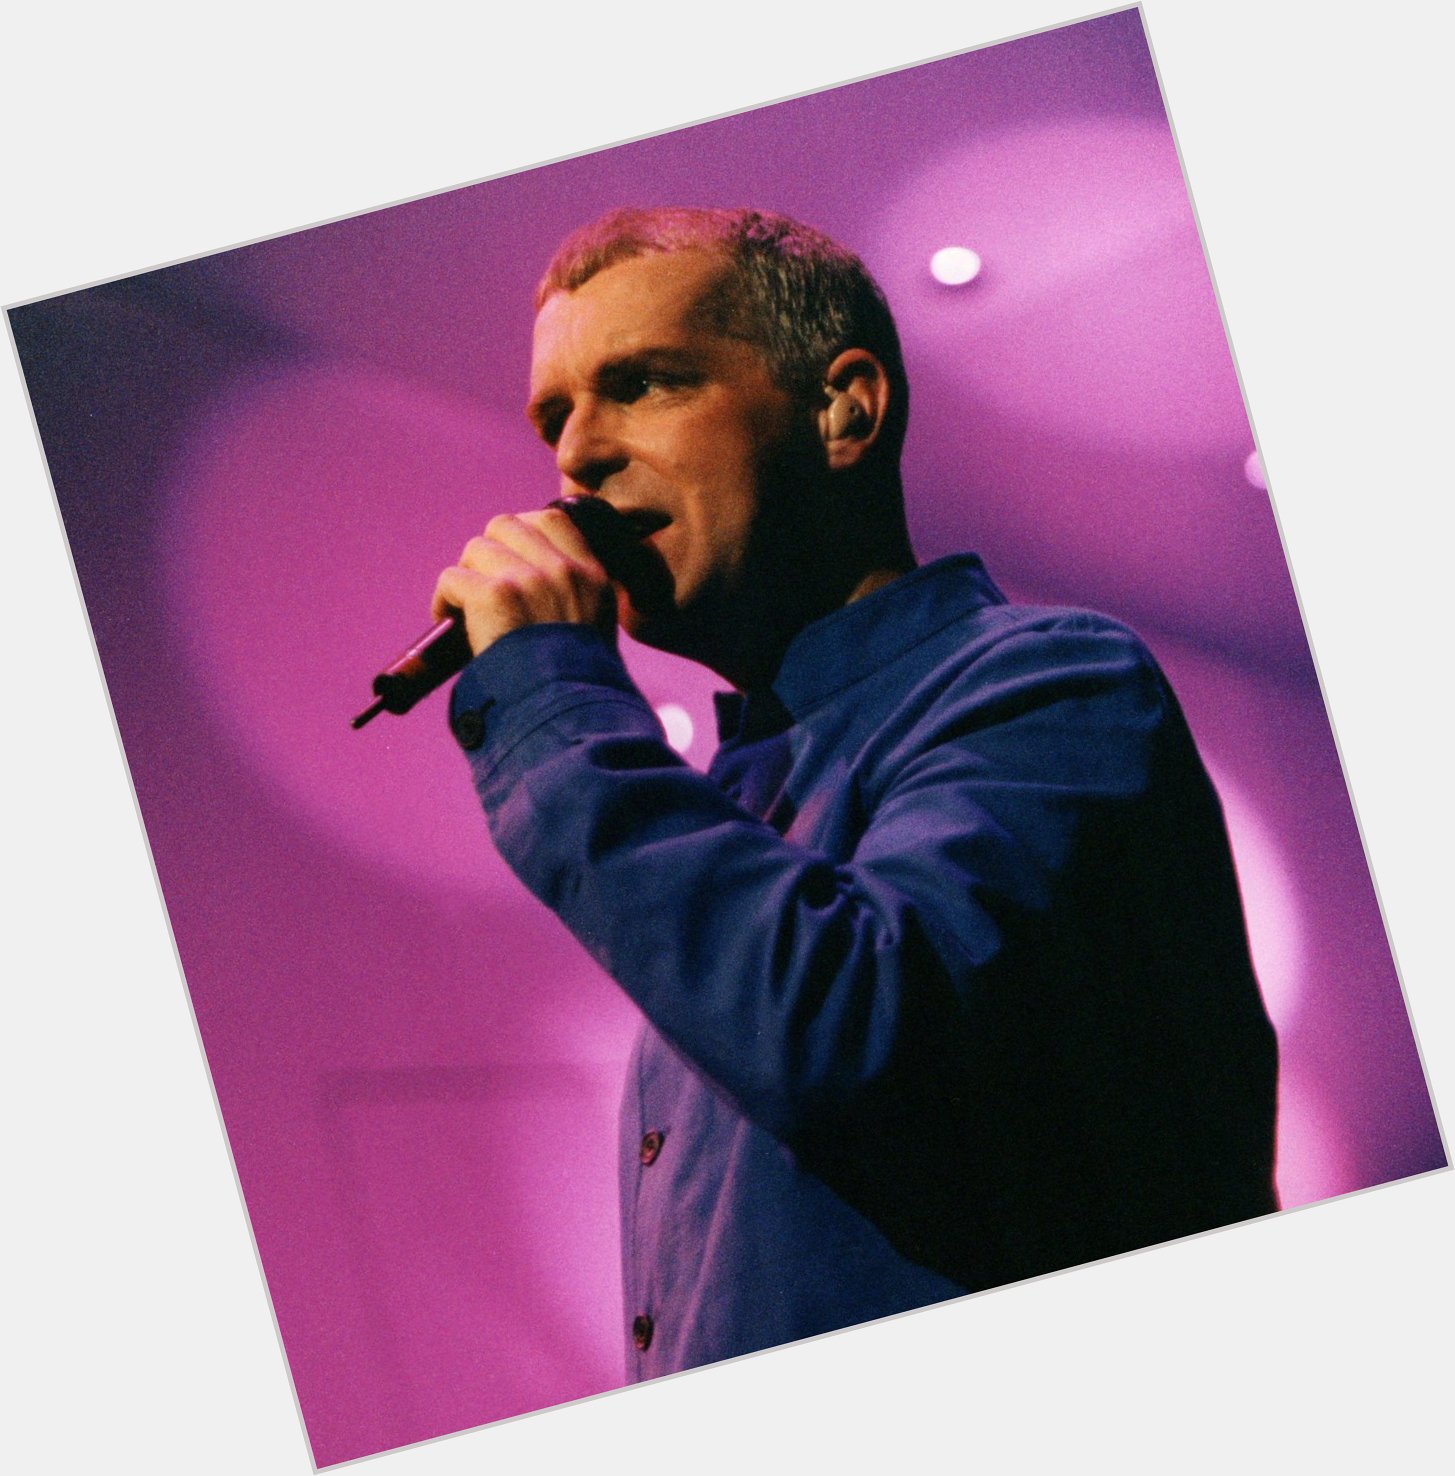 Happy 65th birthday to legend Neil Tennant! Fave PSB song? 